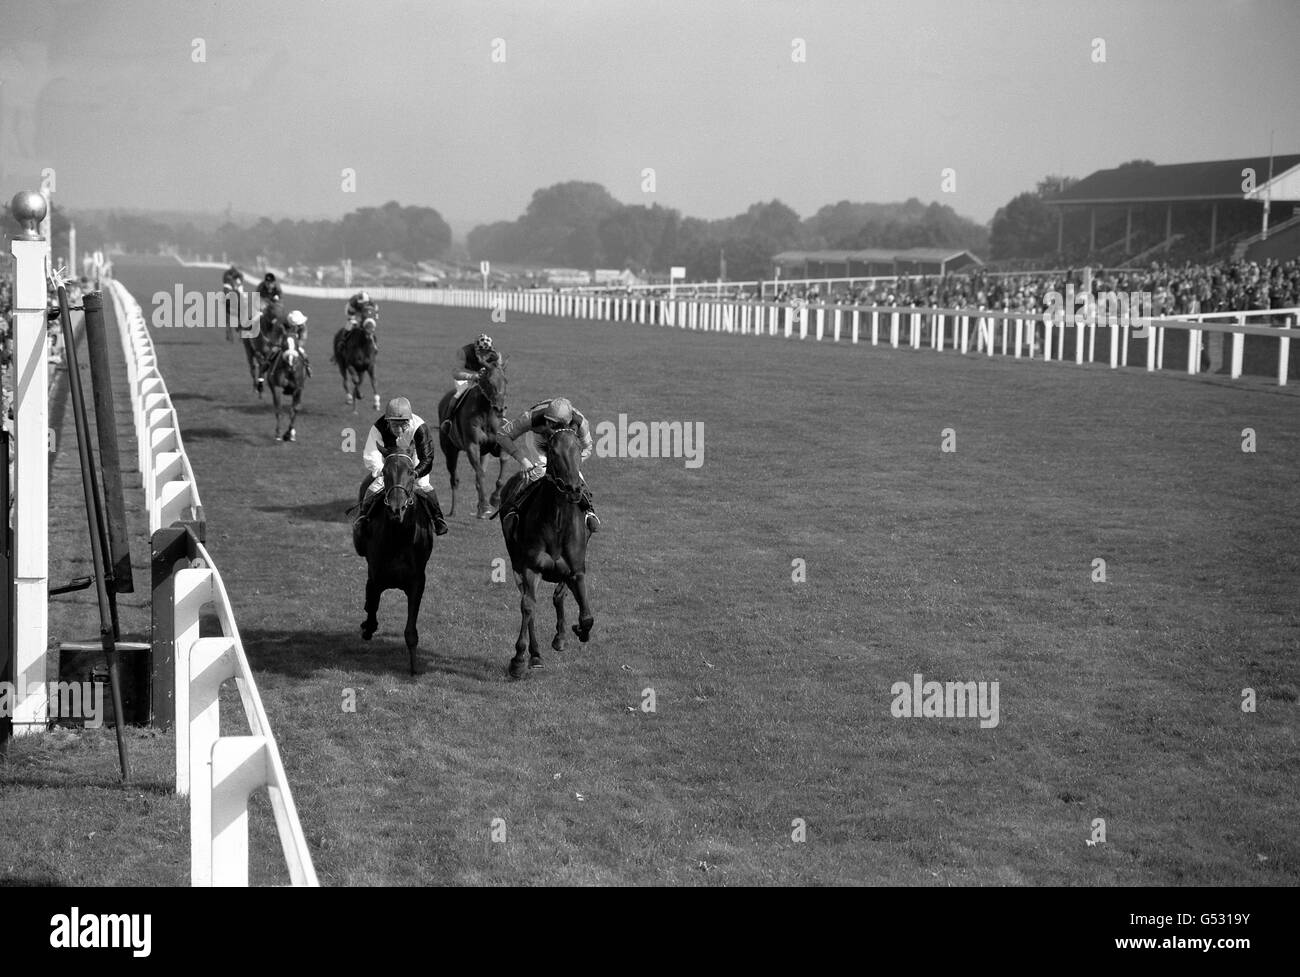 Jockey Lester Piggott (r), riding Mr M.W. Wickham-Boynton's 'Bracey Bridge' first past the post to win The Princess Royal Stakes frm secnd place Mr P. Oppenheimer's 'Miba' (E. Smith up), (left) and third place Countess Batthyany's 'Livia' (J. Purtell up), at Ascot. Stock Photo